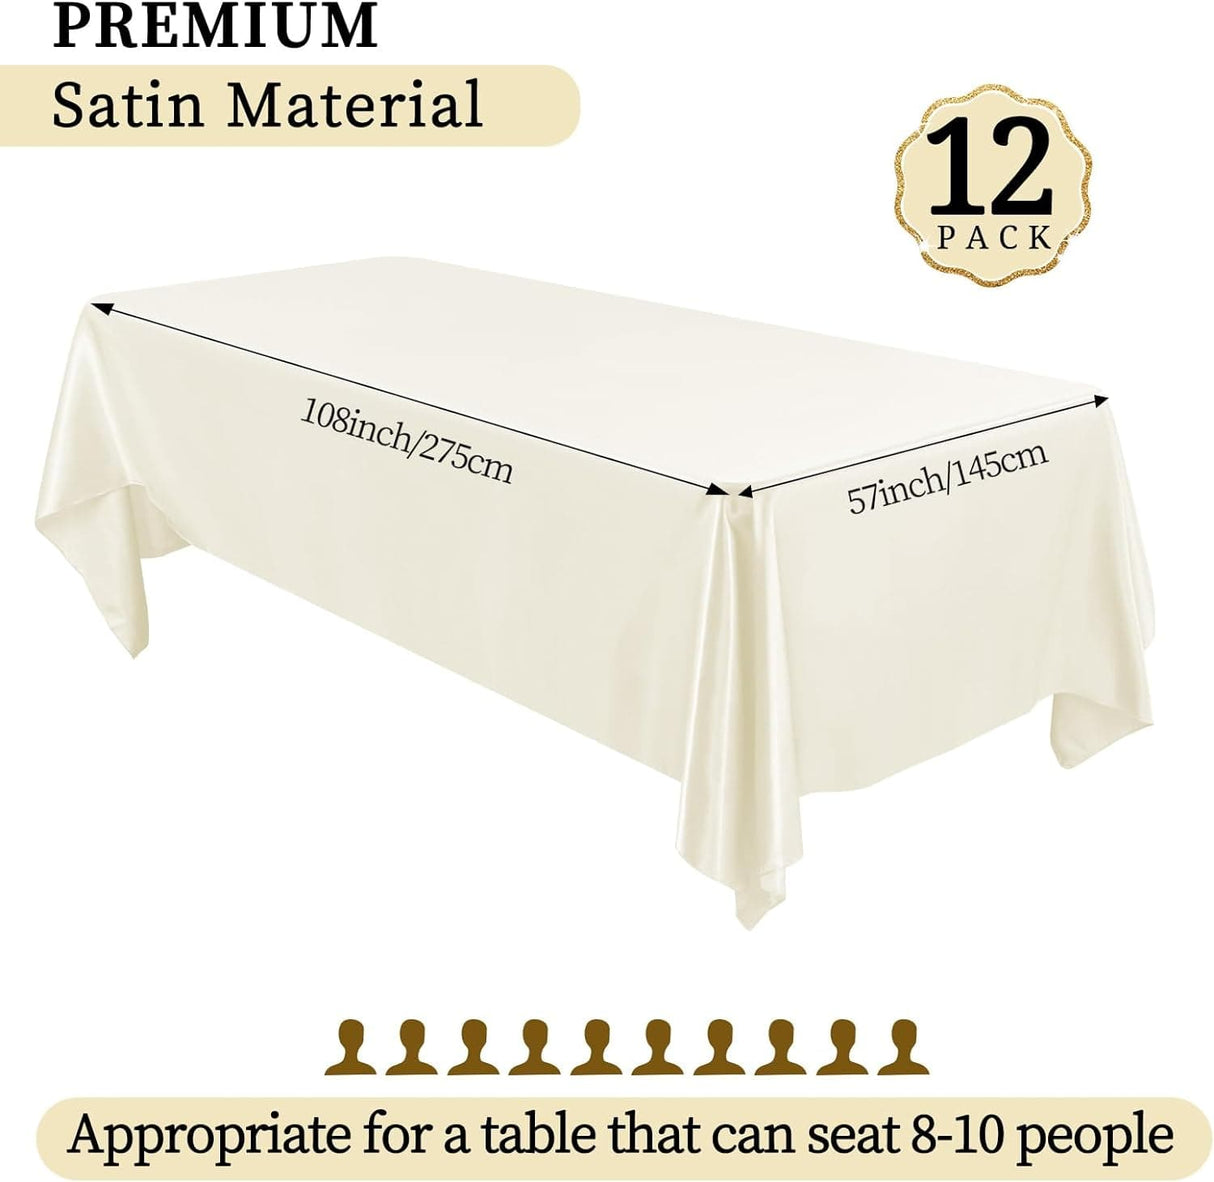 6/12 Pack  Satin Tablecloth 57 x 108 Inch Overlay Satin Table Cover Premium Rectangle Bright Silk Tablecloth Smooth Fabric Table Decoration for Wedding Banquet Party Birthday Events Restaurant